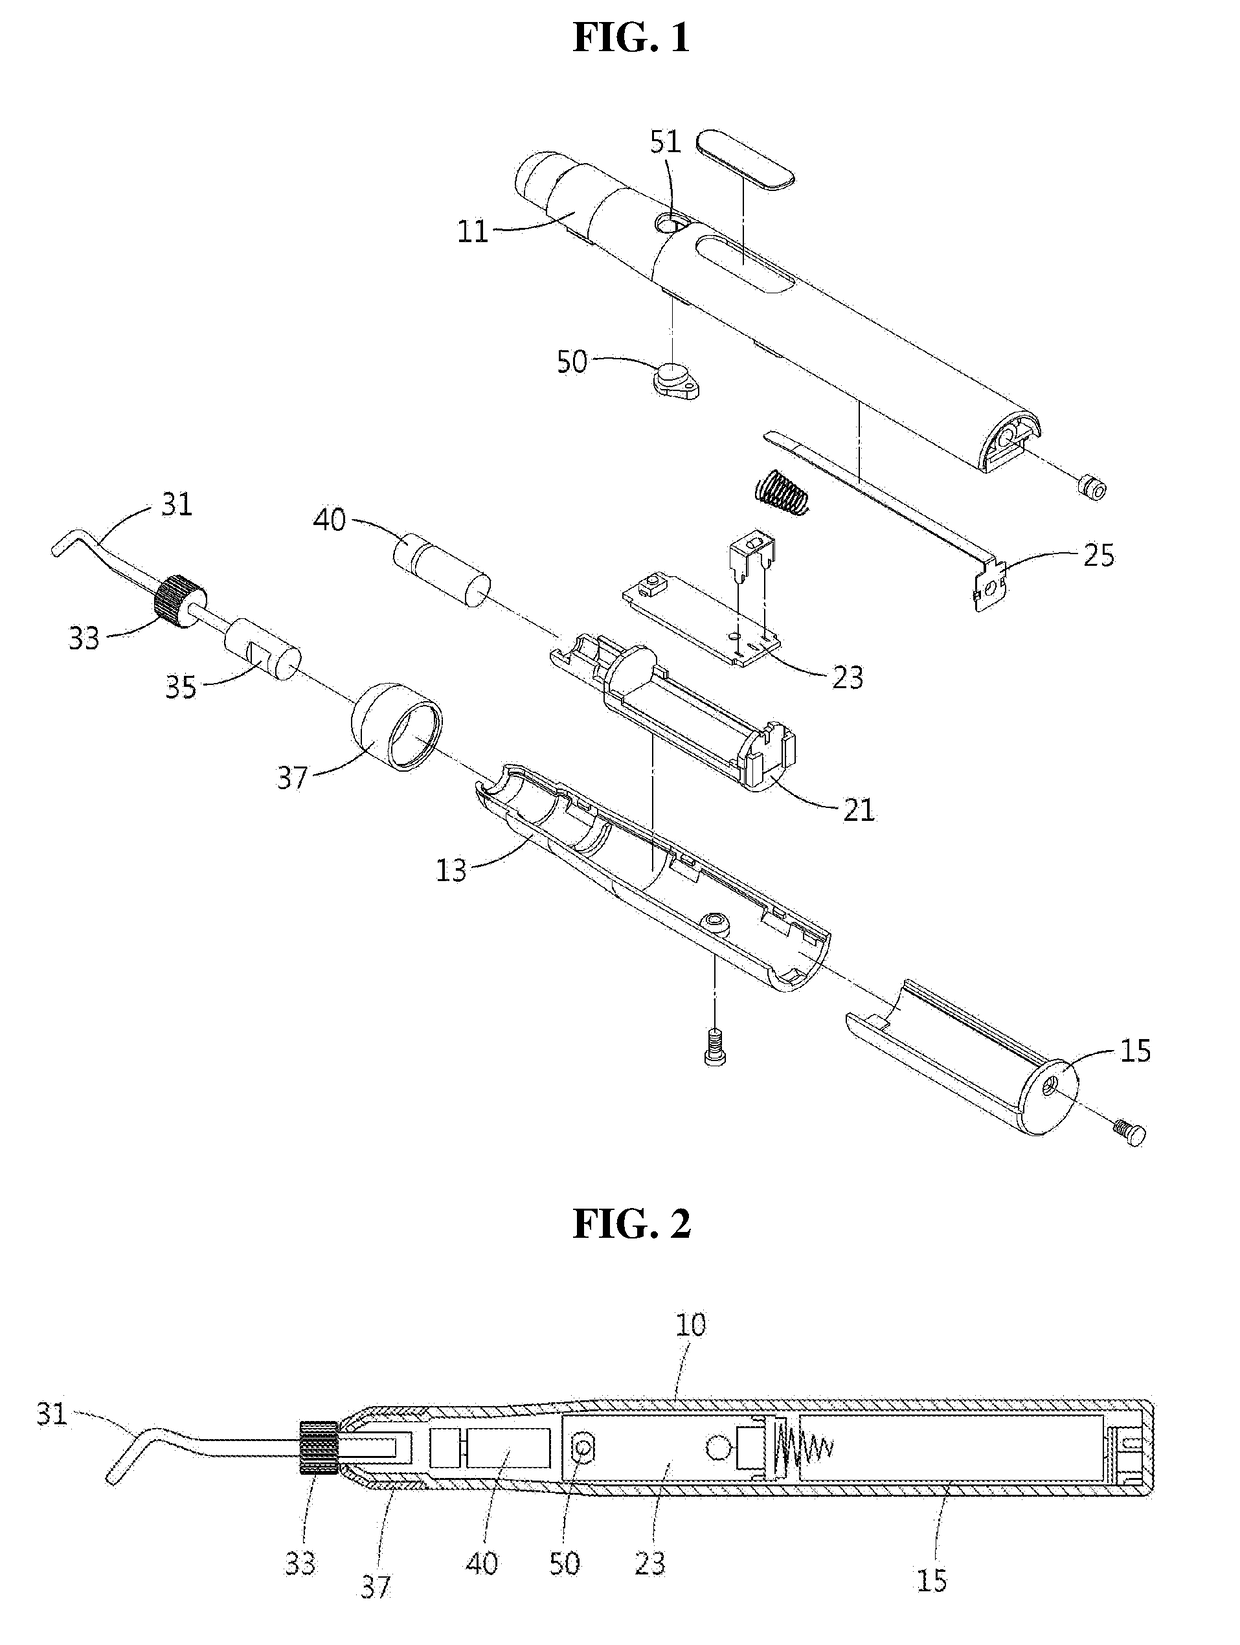 Vibrator for attaching composite resin to a tooth